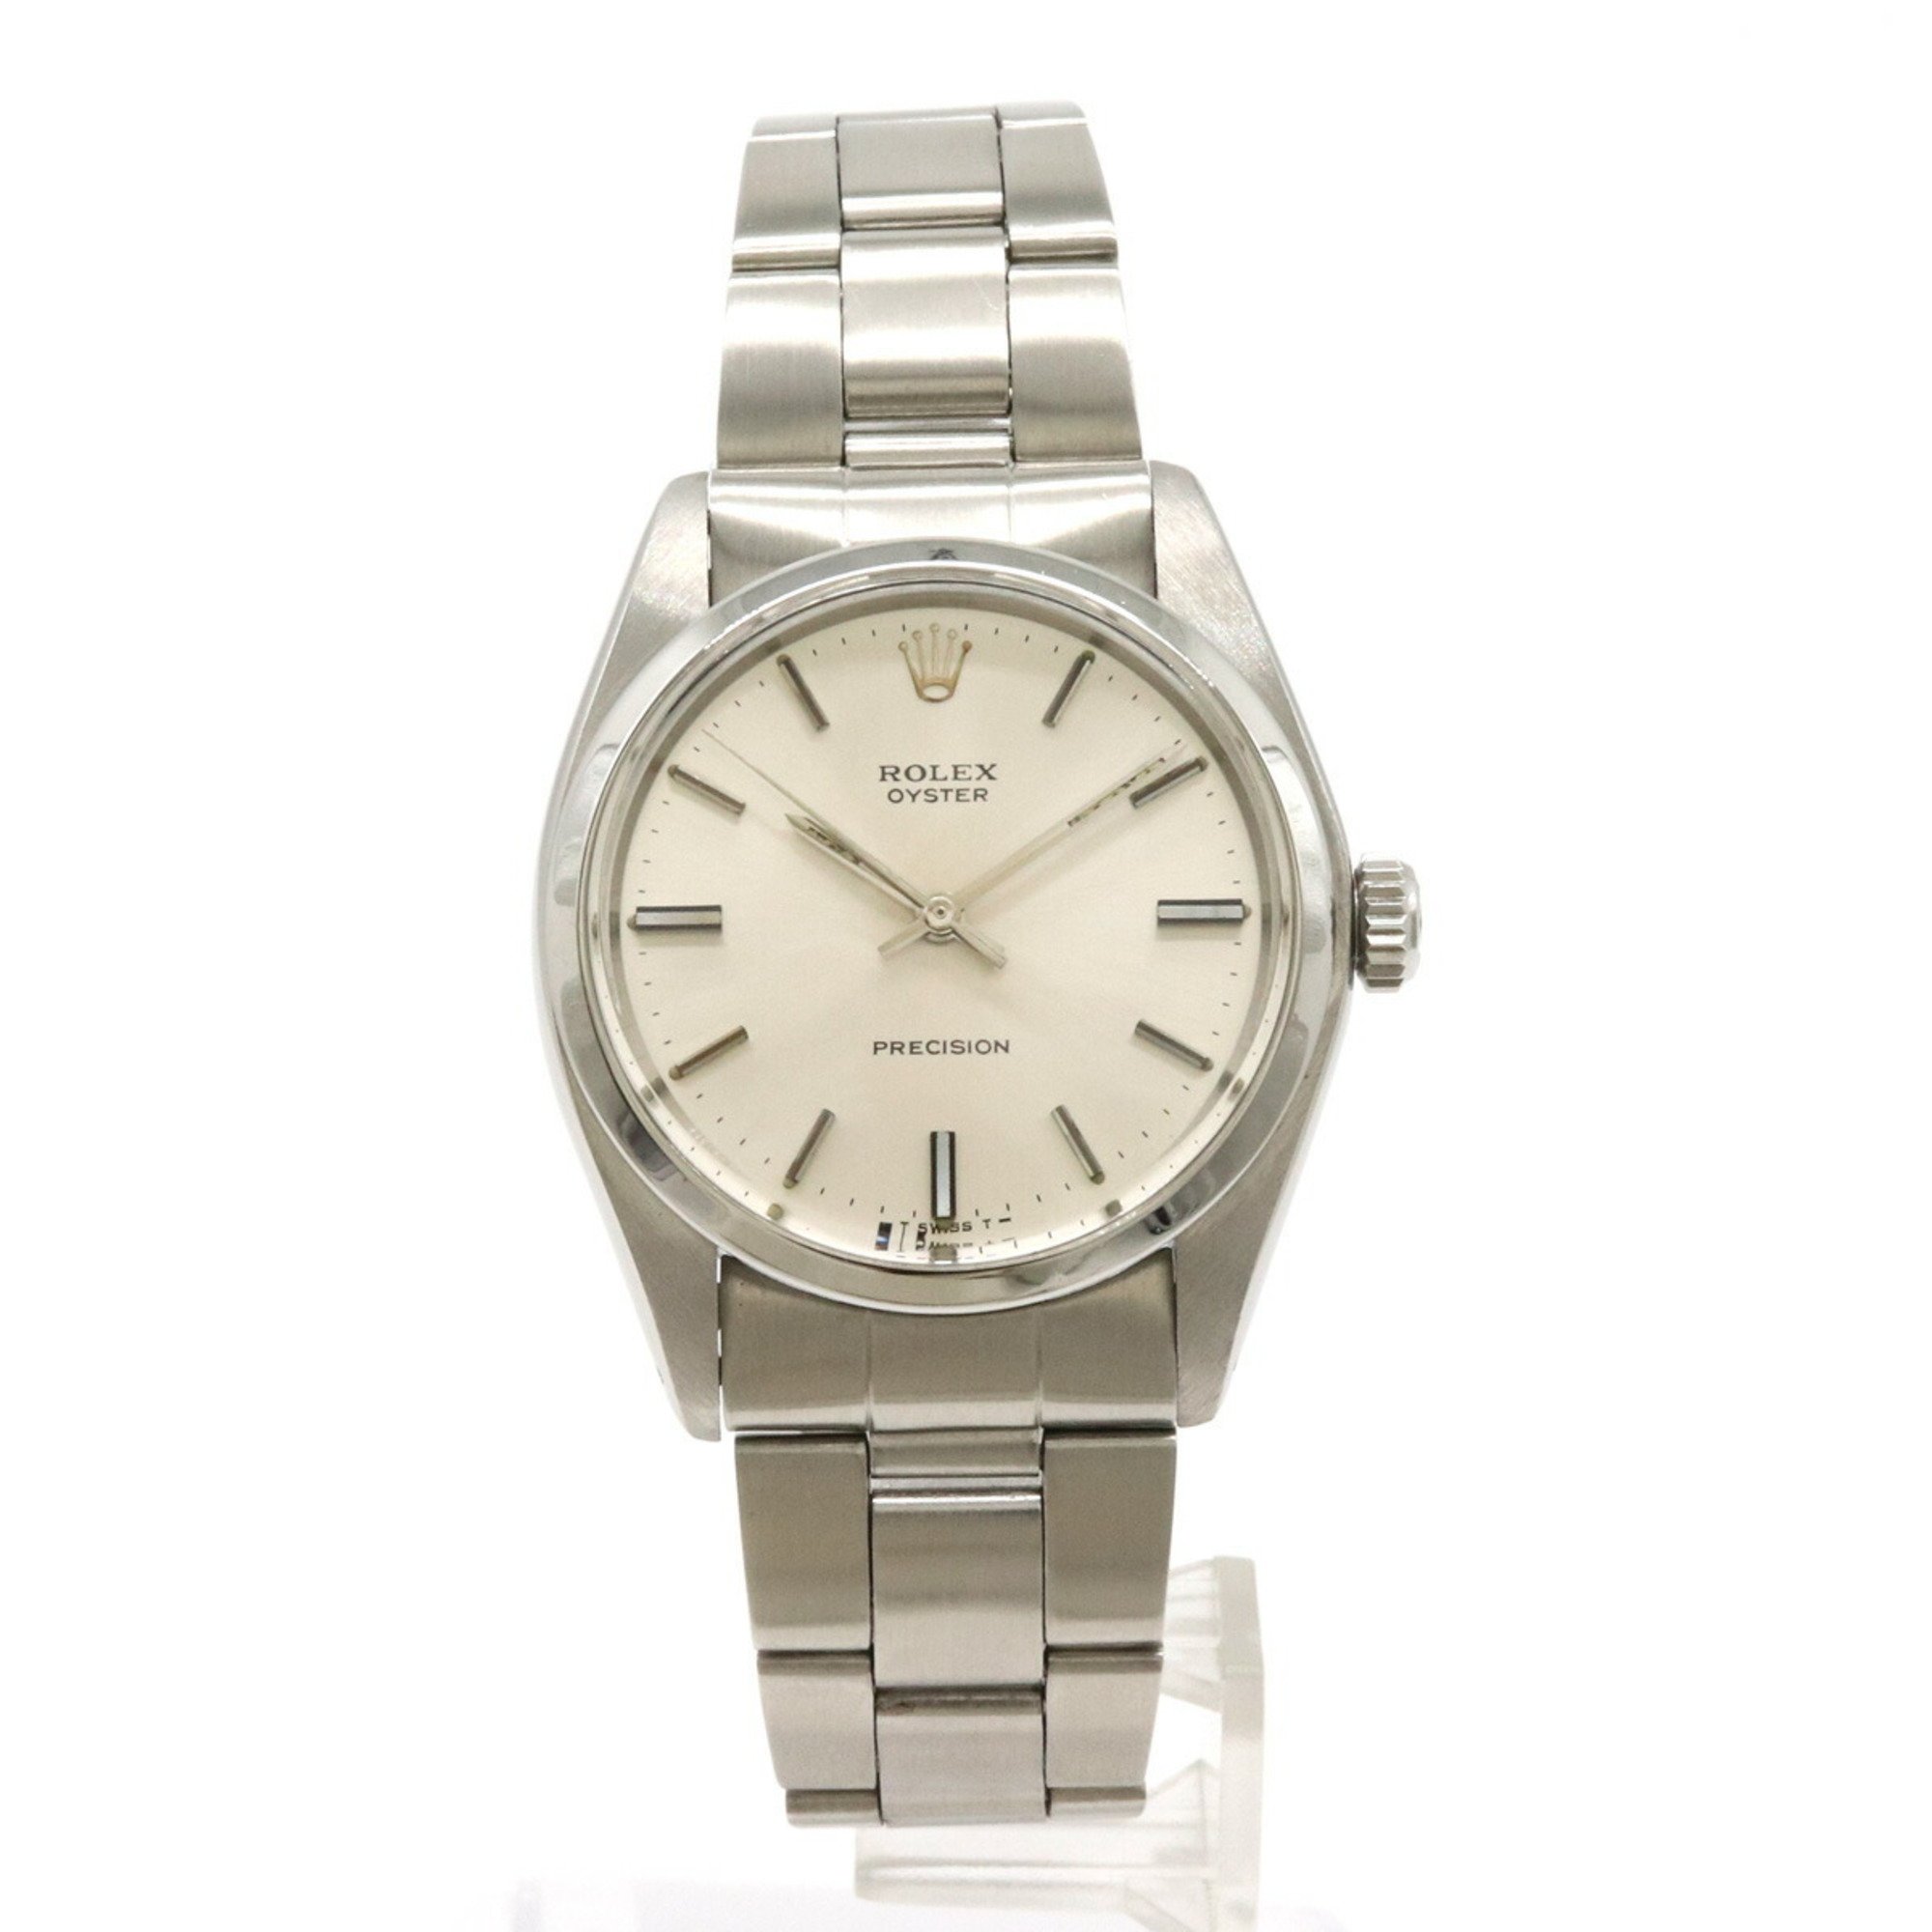 ROLEX Rolex Oyster Precision Silver Dial Stainless Steel Men's Hand-wound Watch No. 37 6426